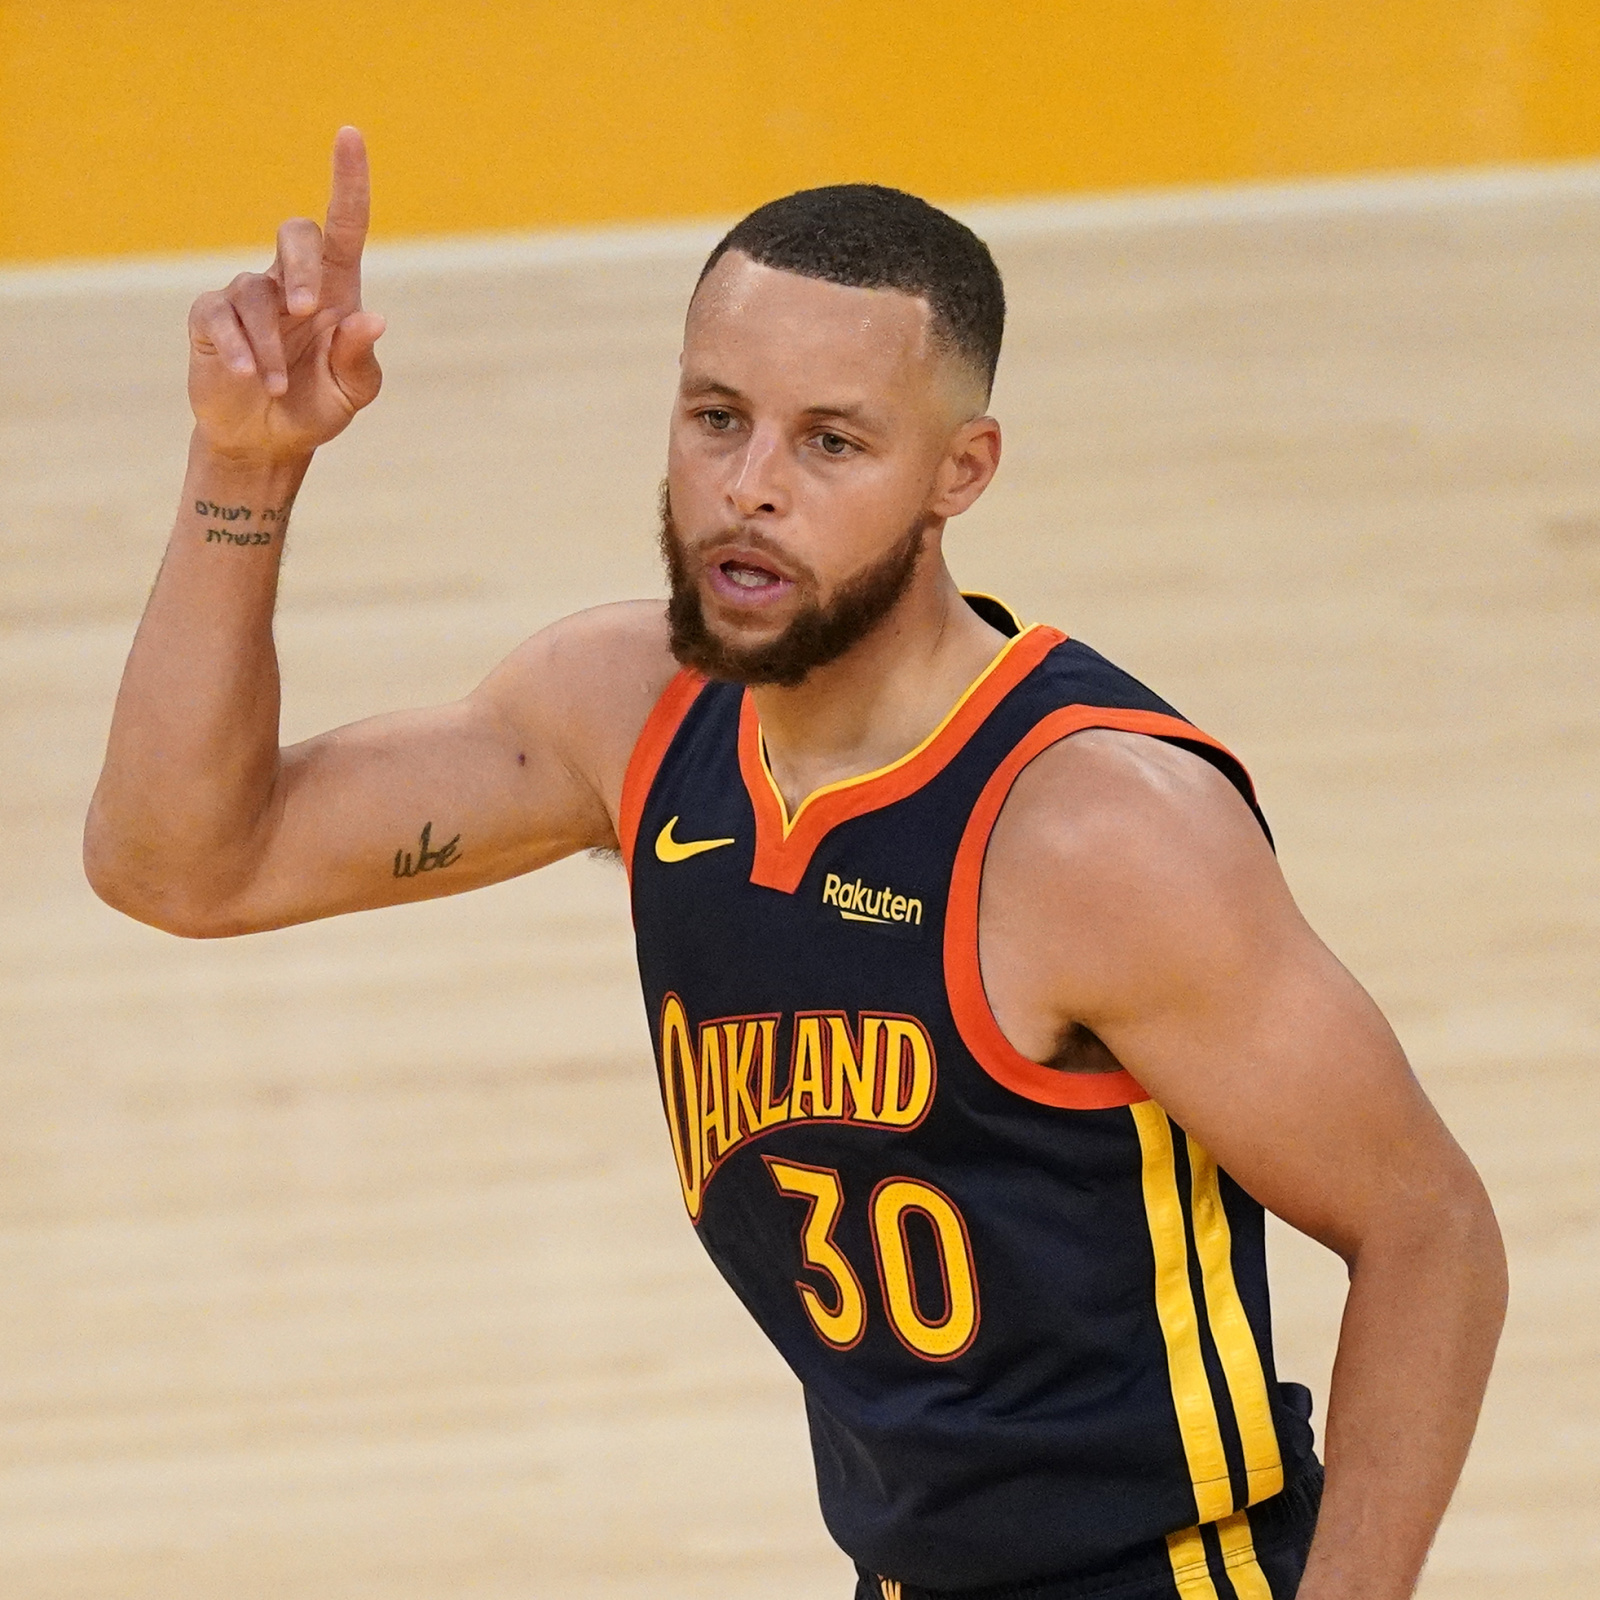 Stephen Curry Says He Won't Play for U.S. Olympic Team - The New York Times